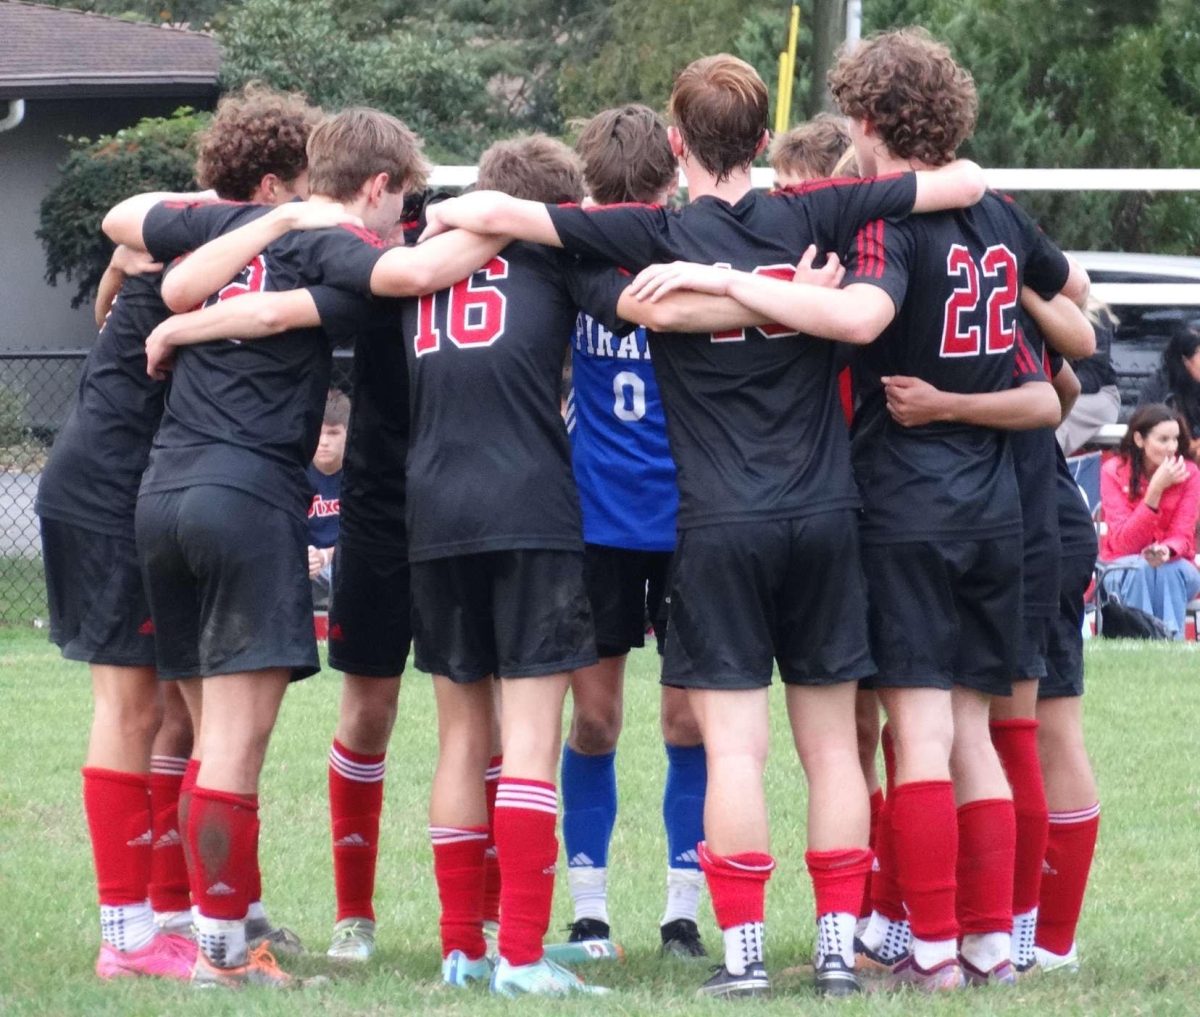 (Photo courtesy of Kelly Huber)
The Pirates in a huddle during their game.